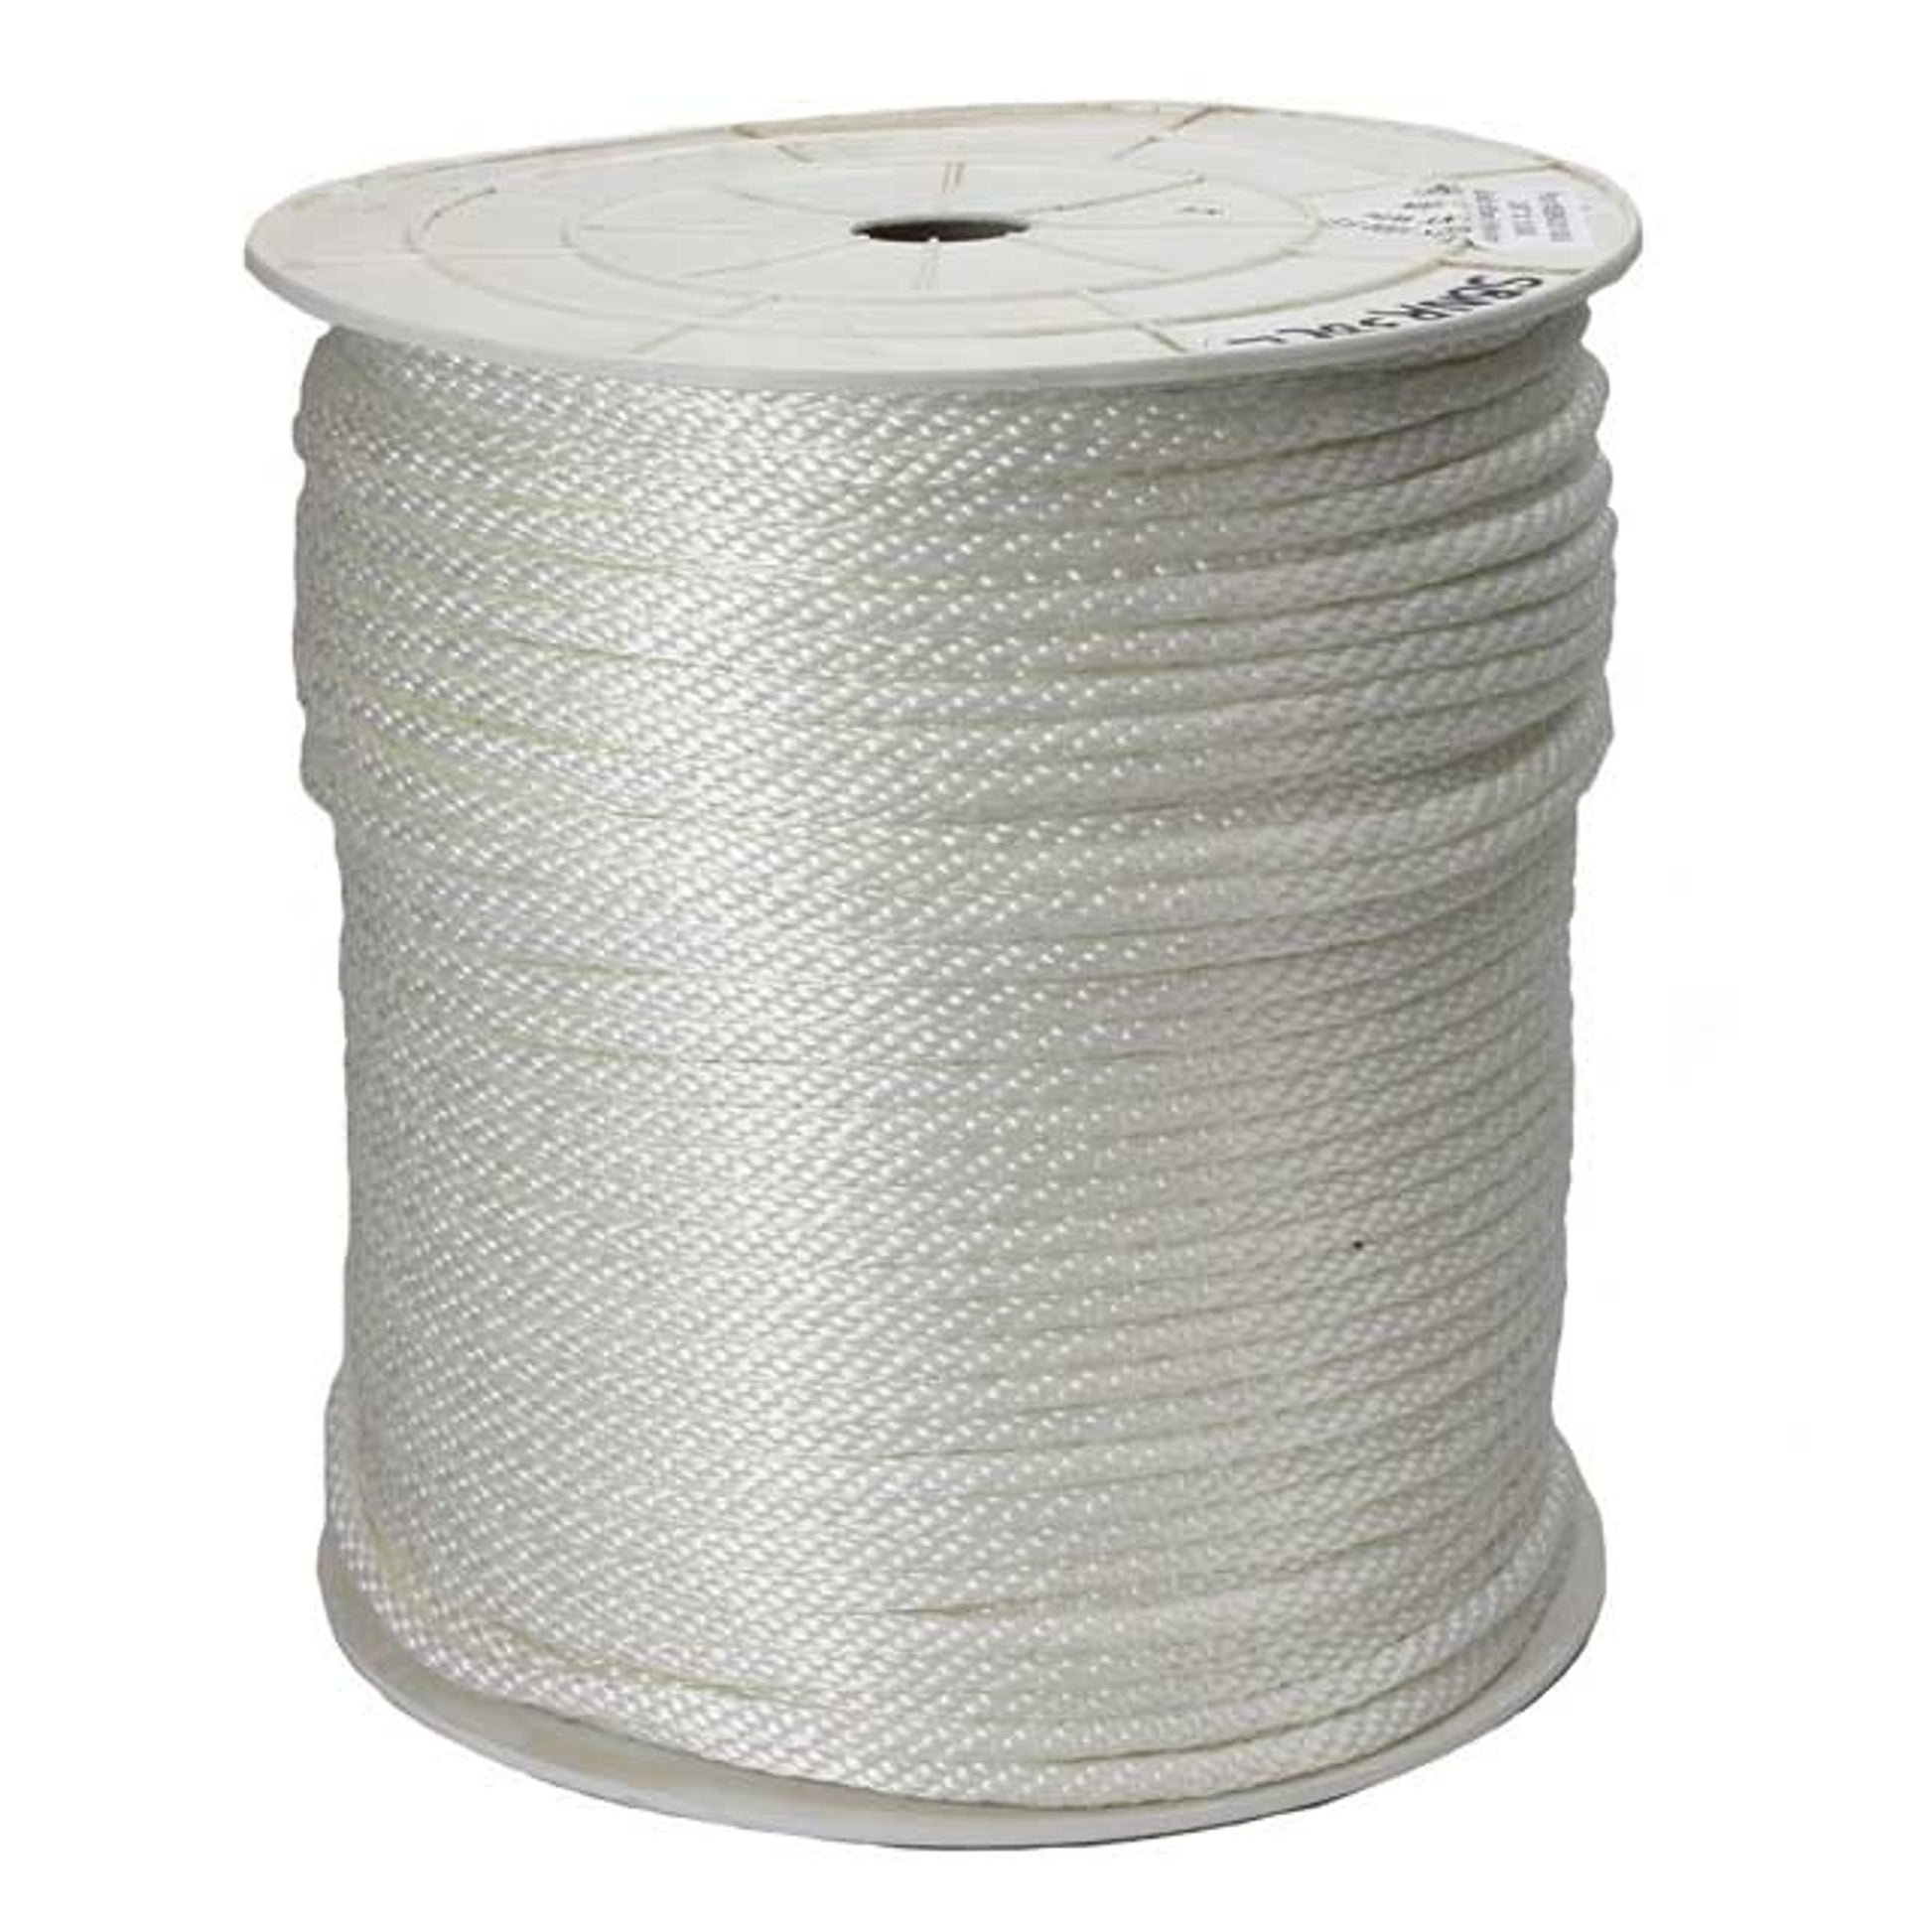 Nylon Rope 1/8 inch(3mm) Solid Braid,High Strength,UV Resistant,for Commercial, Anchors, Crafts, Blocks, Pulleys, Towing, Cargo, Tie-Downs,Wheel 